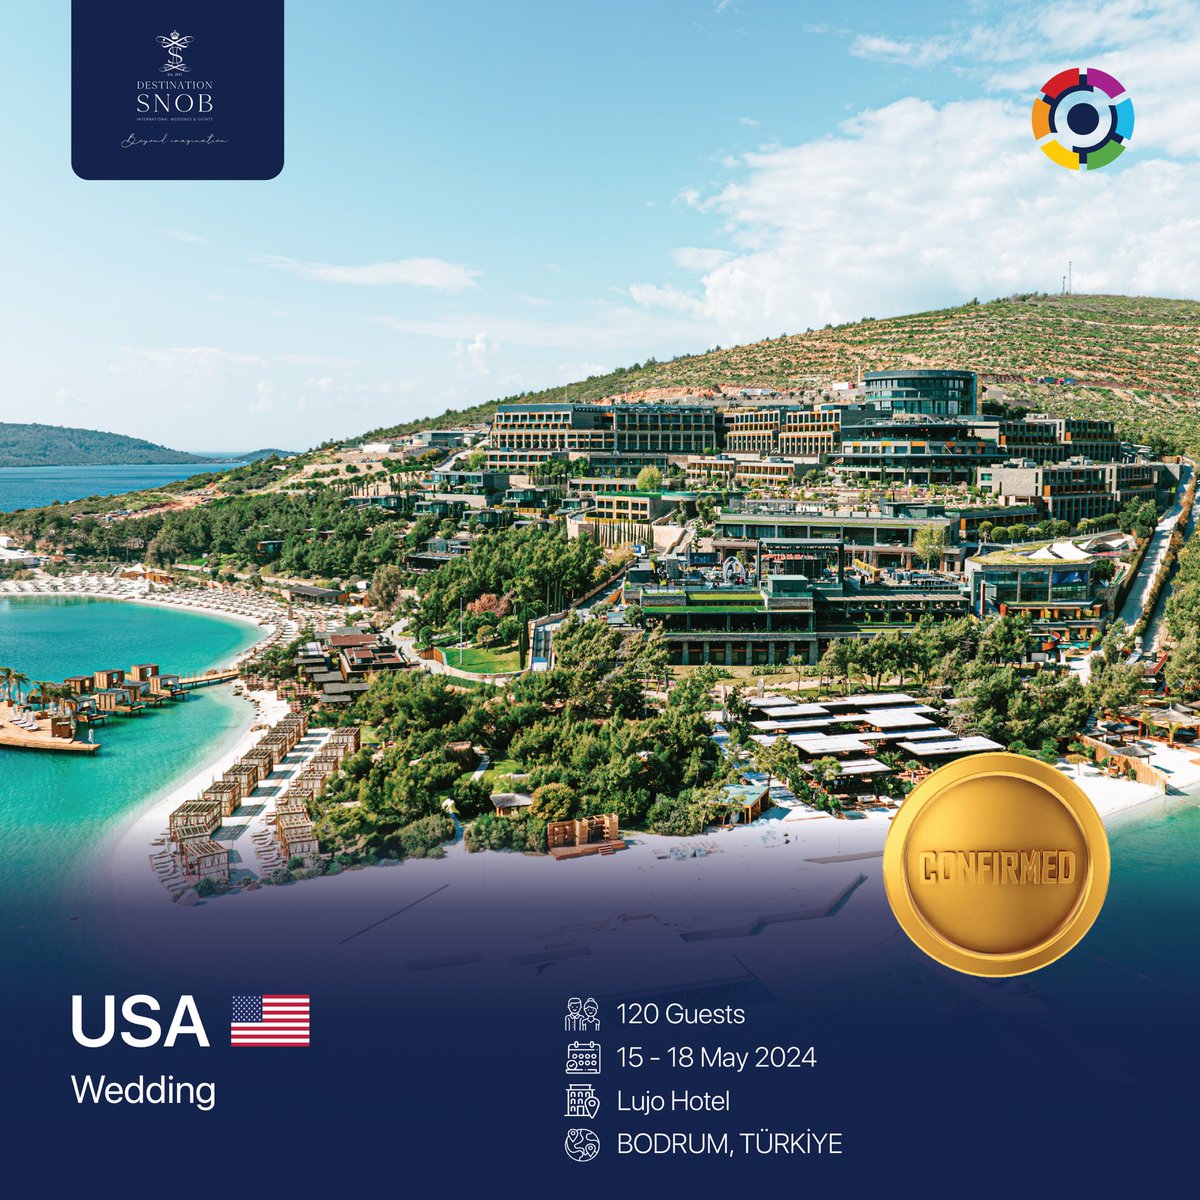 We proudly announce our new project with our partner Destination Snob at Lujo Bodrum between the 15th and 18th of May 2024.

#inventumglobal #meeting #incentive #conference #events #wedding #team #together #inventumwedding #inventummice #destination #micetürkiye #travelmarketing